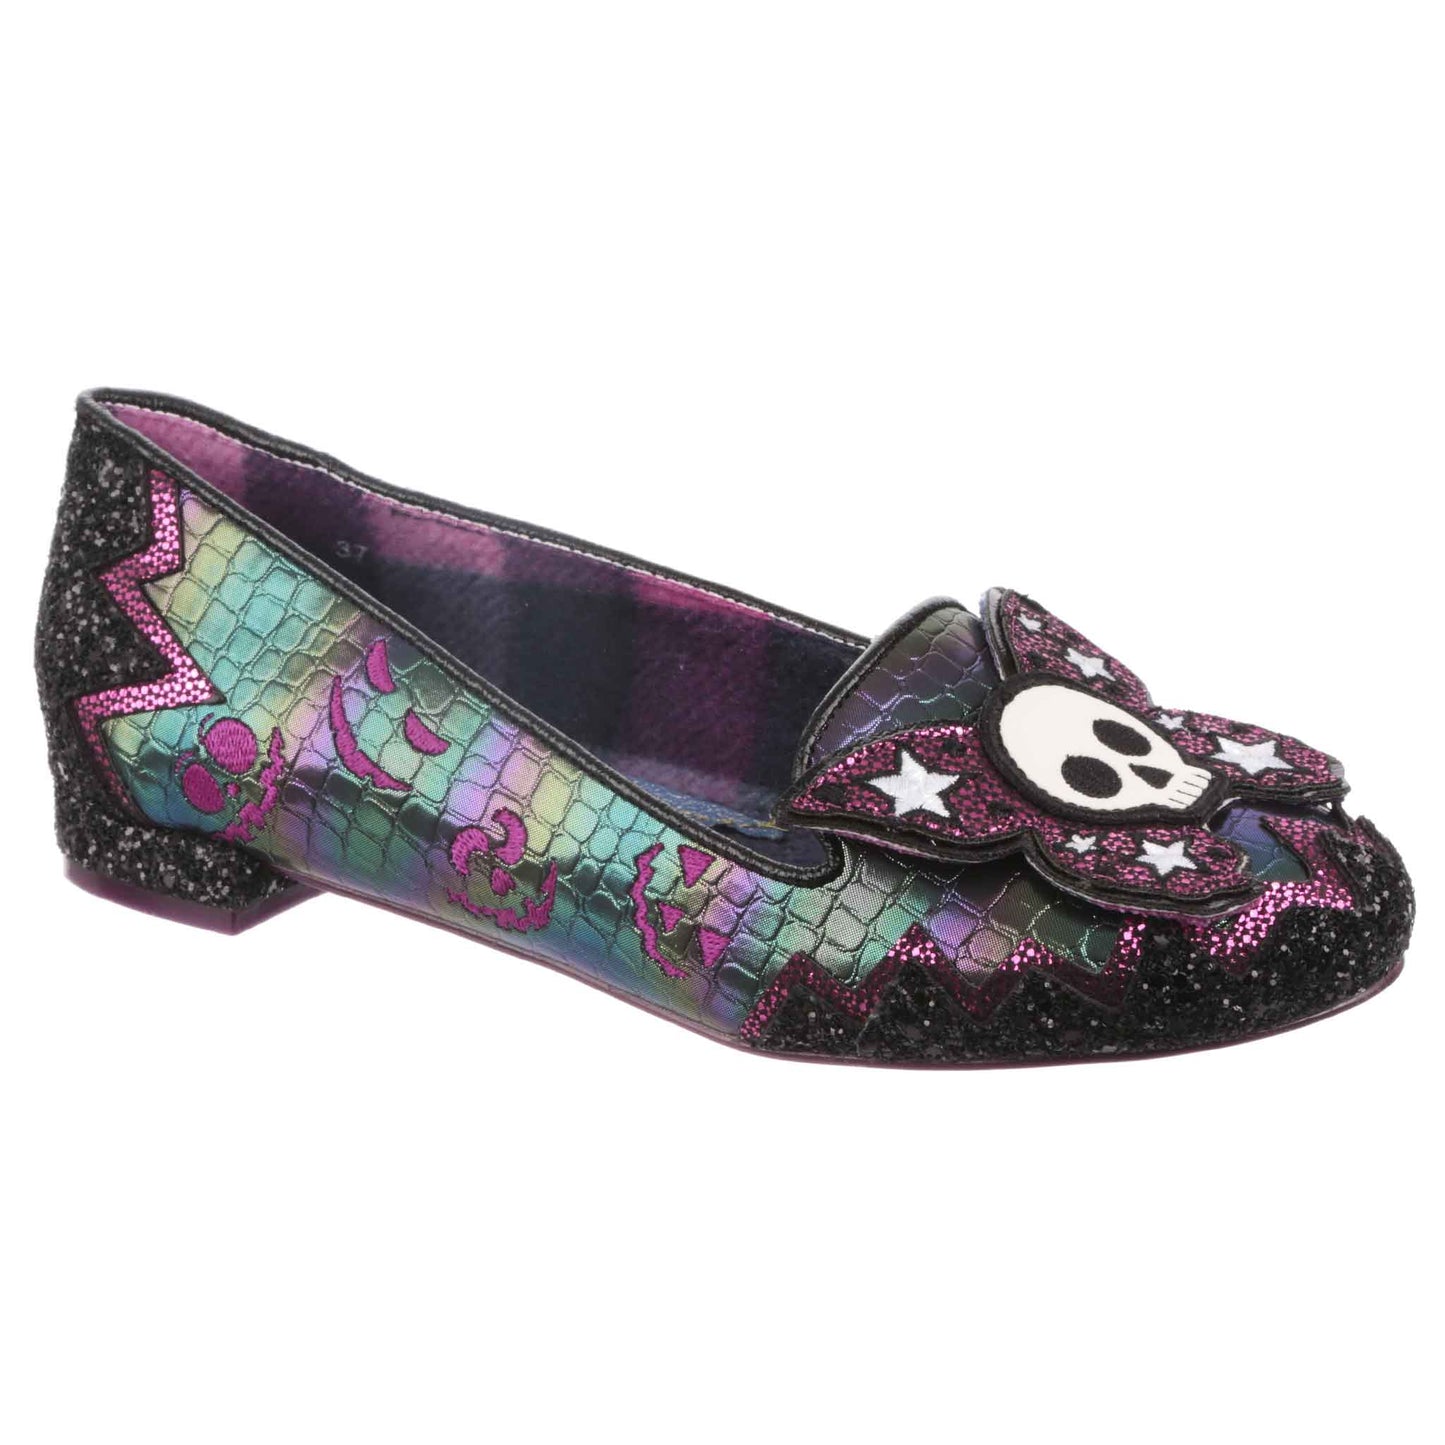 Deadly Kiss - Rockamilly-Shoes-Vintage